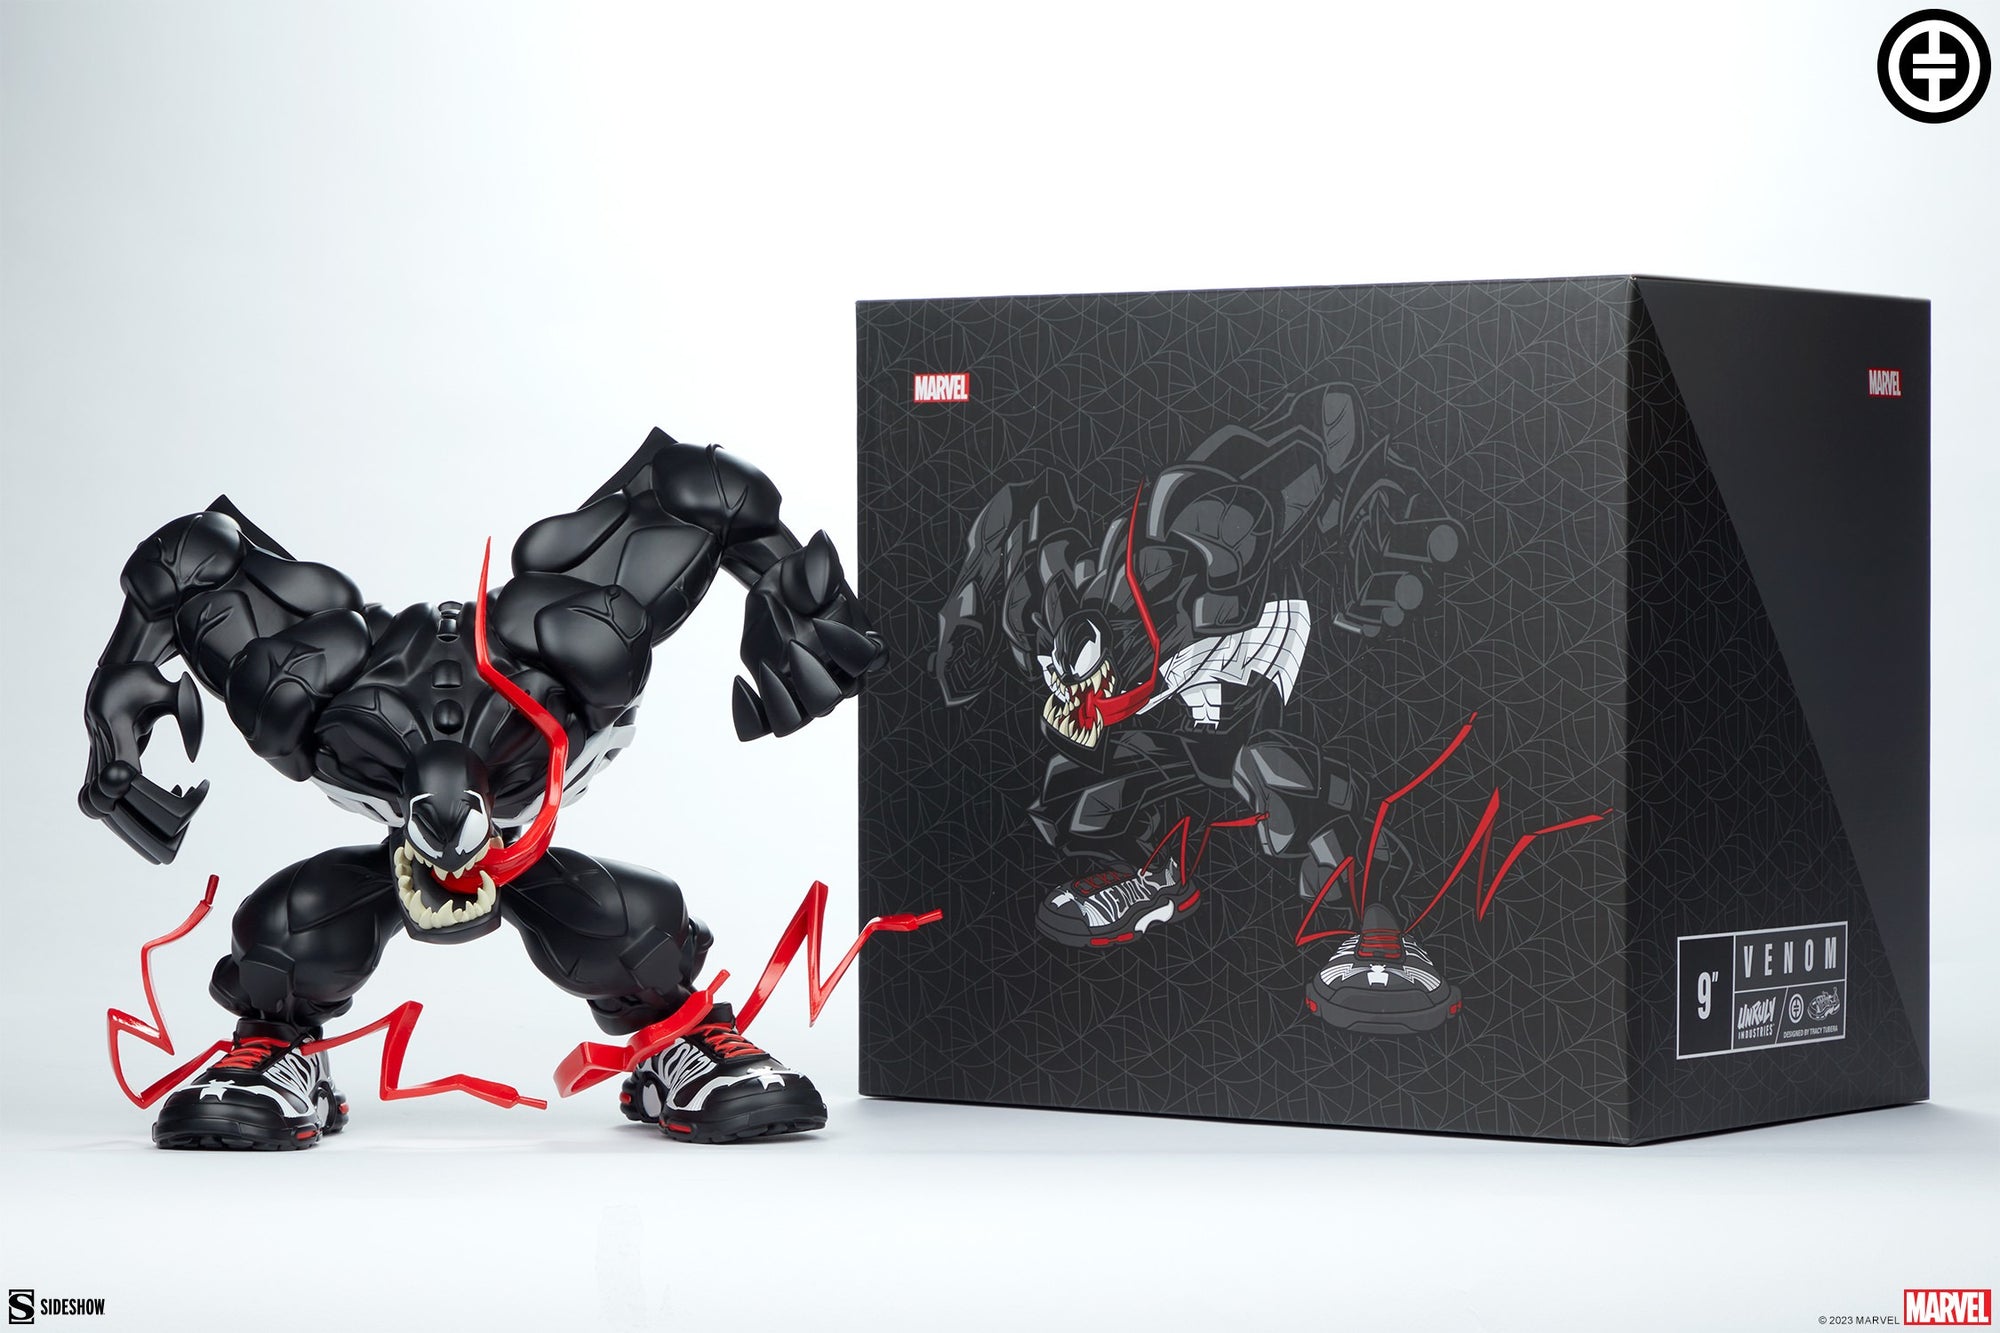 Venom Marvel Designer Collectible Statue by Tracy Tubera x Unruly Industries